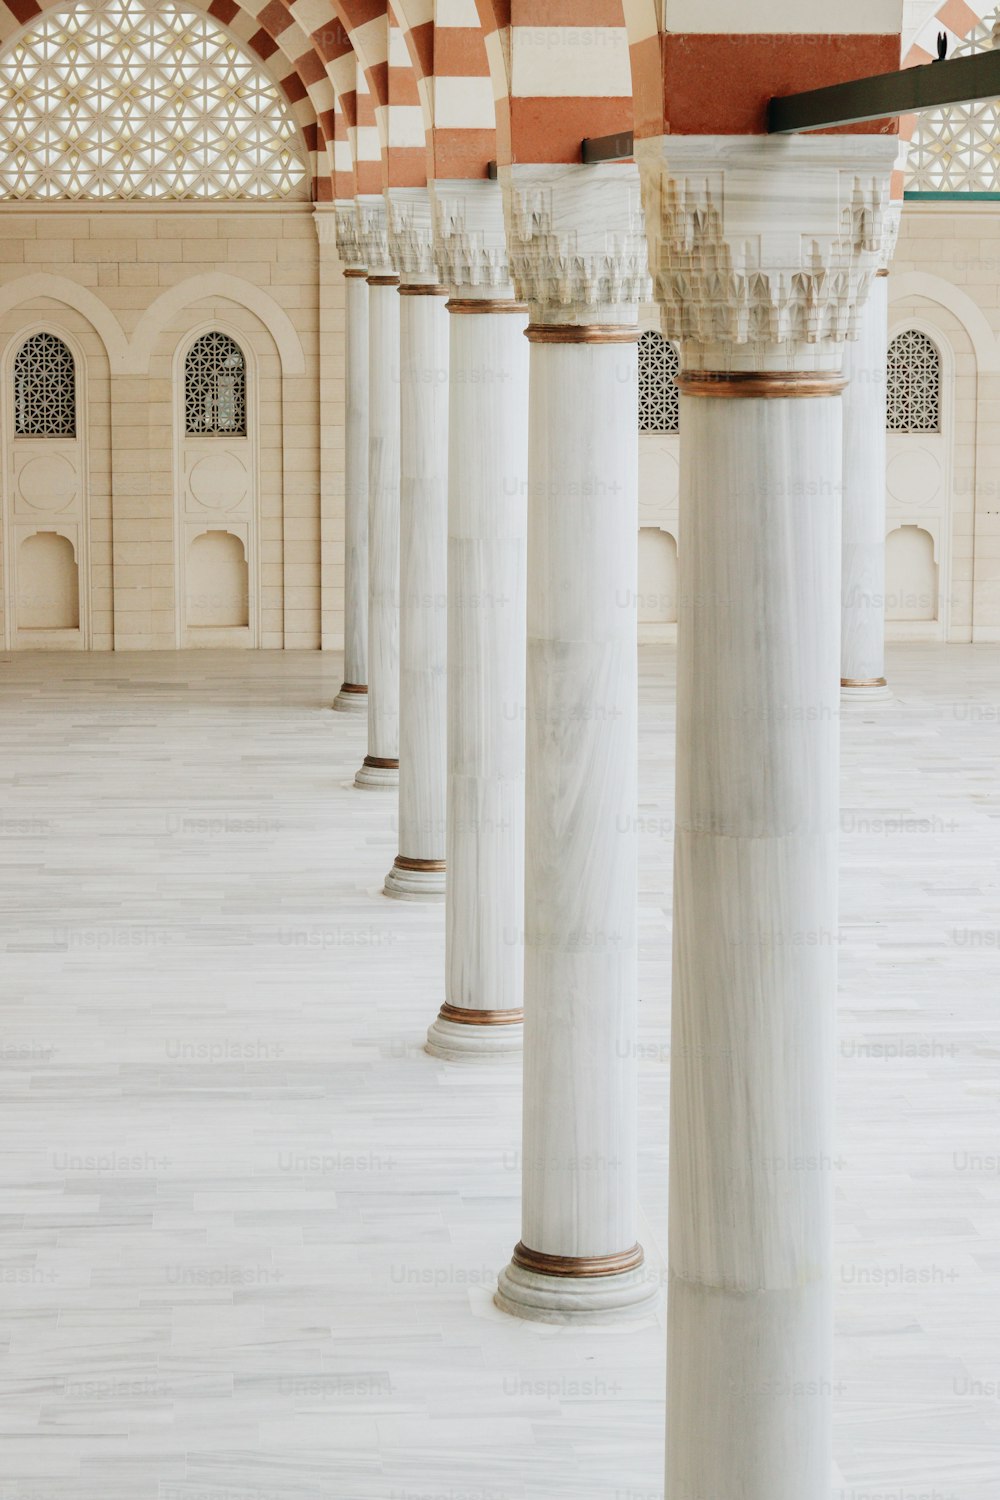 a row of white marble pillars in a building